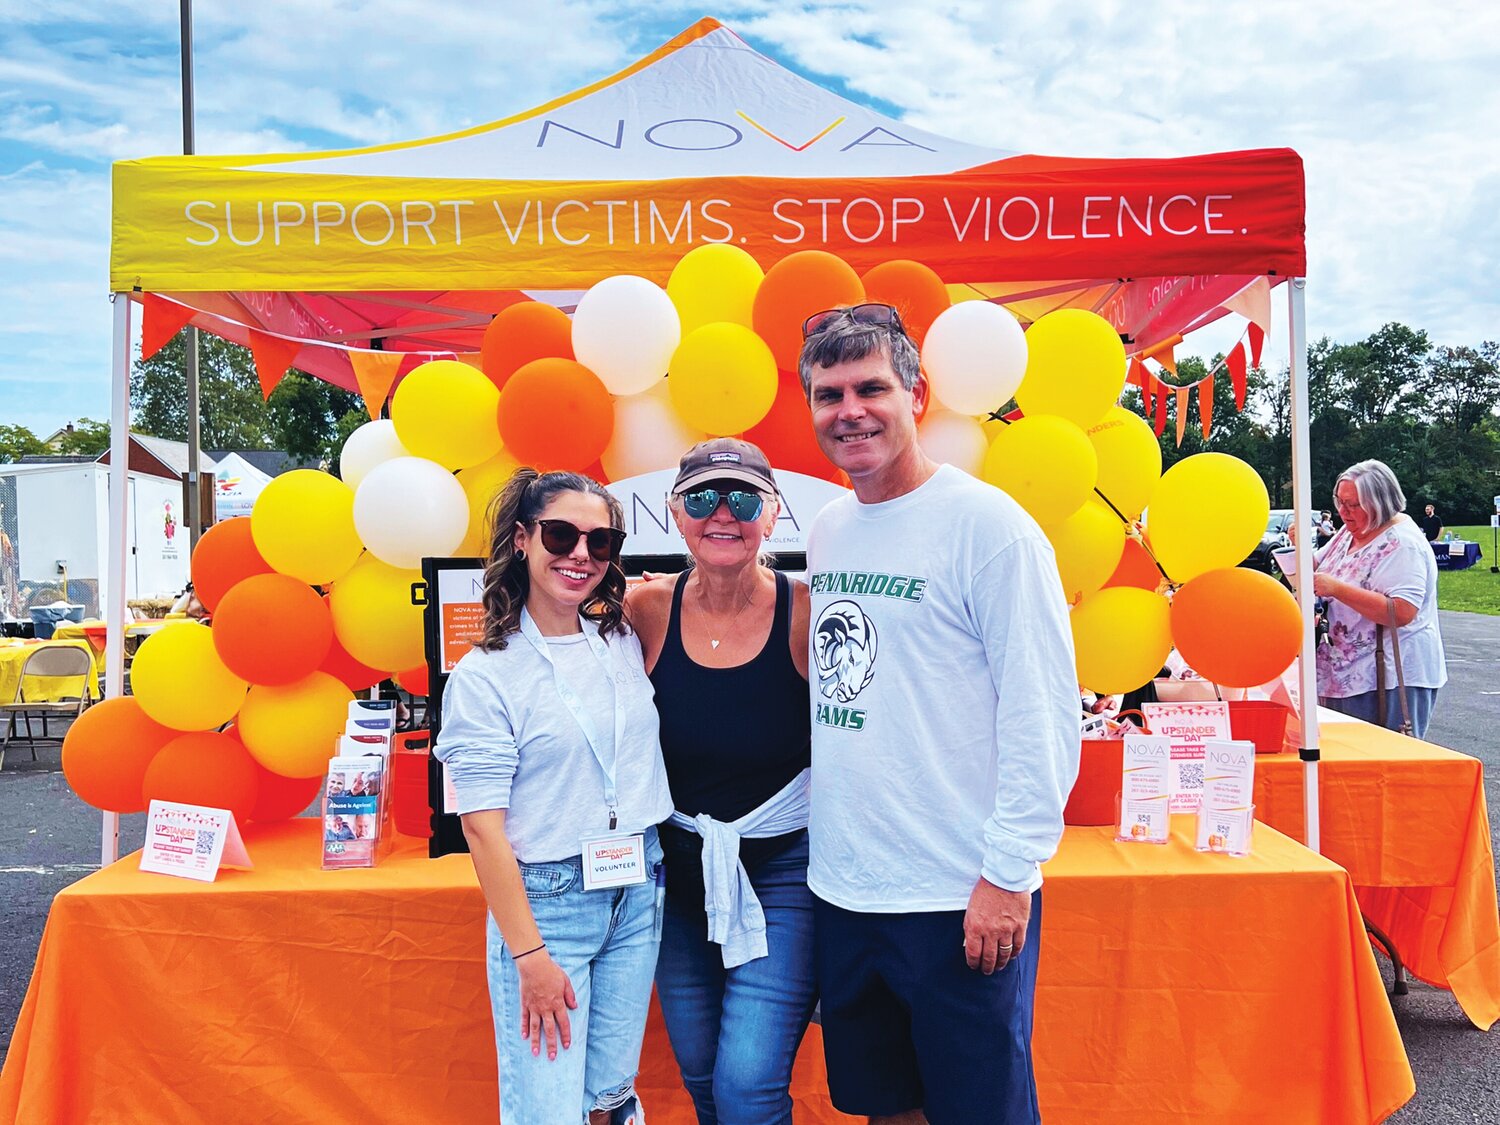 NOVA High School Primary Prevention Coordinator Katie Sanford and NOVA Director of Prevention and Training Mary Worthington pose in front of NOVA’s tent with Joseph Werner, Pennridge High School social worker.